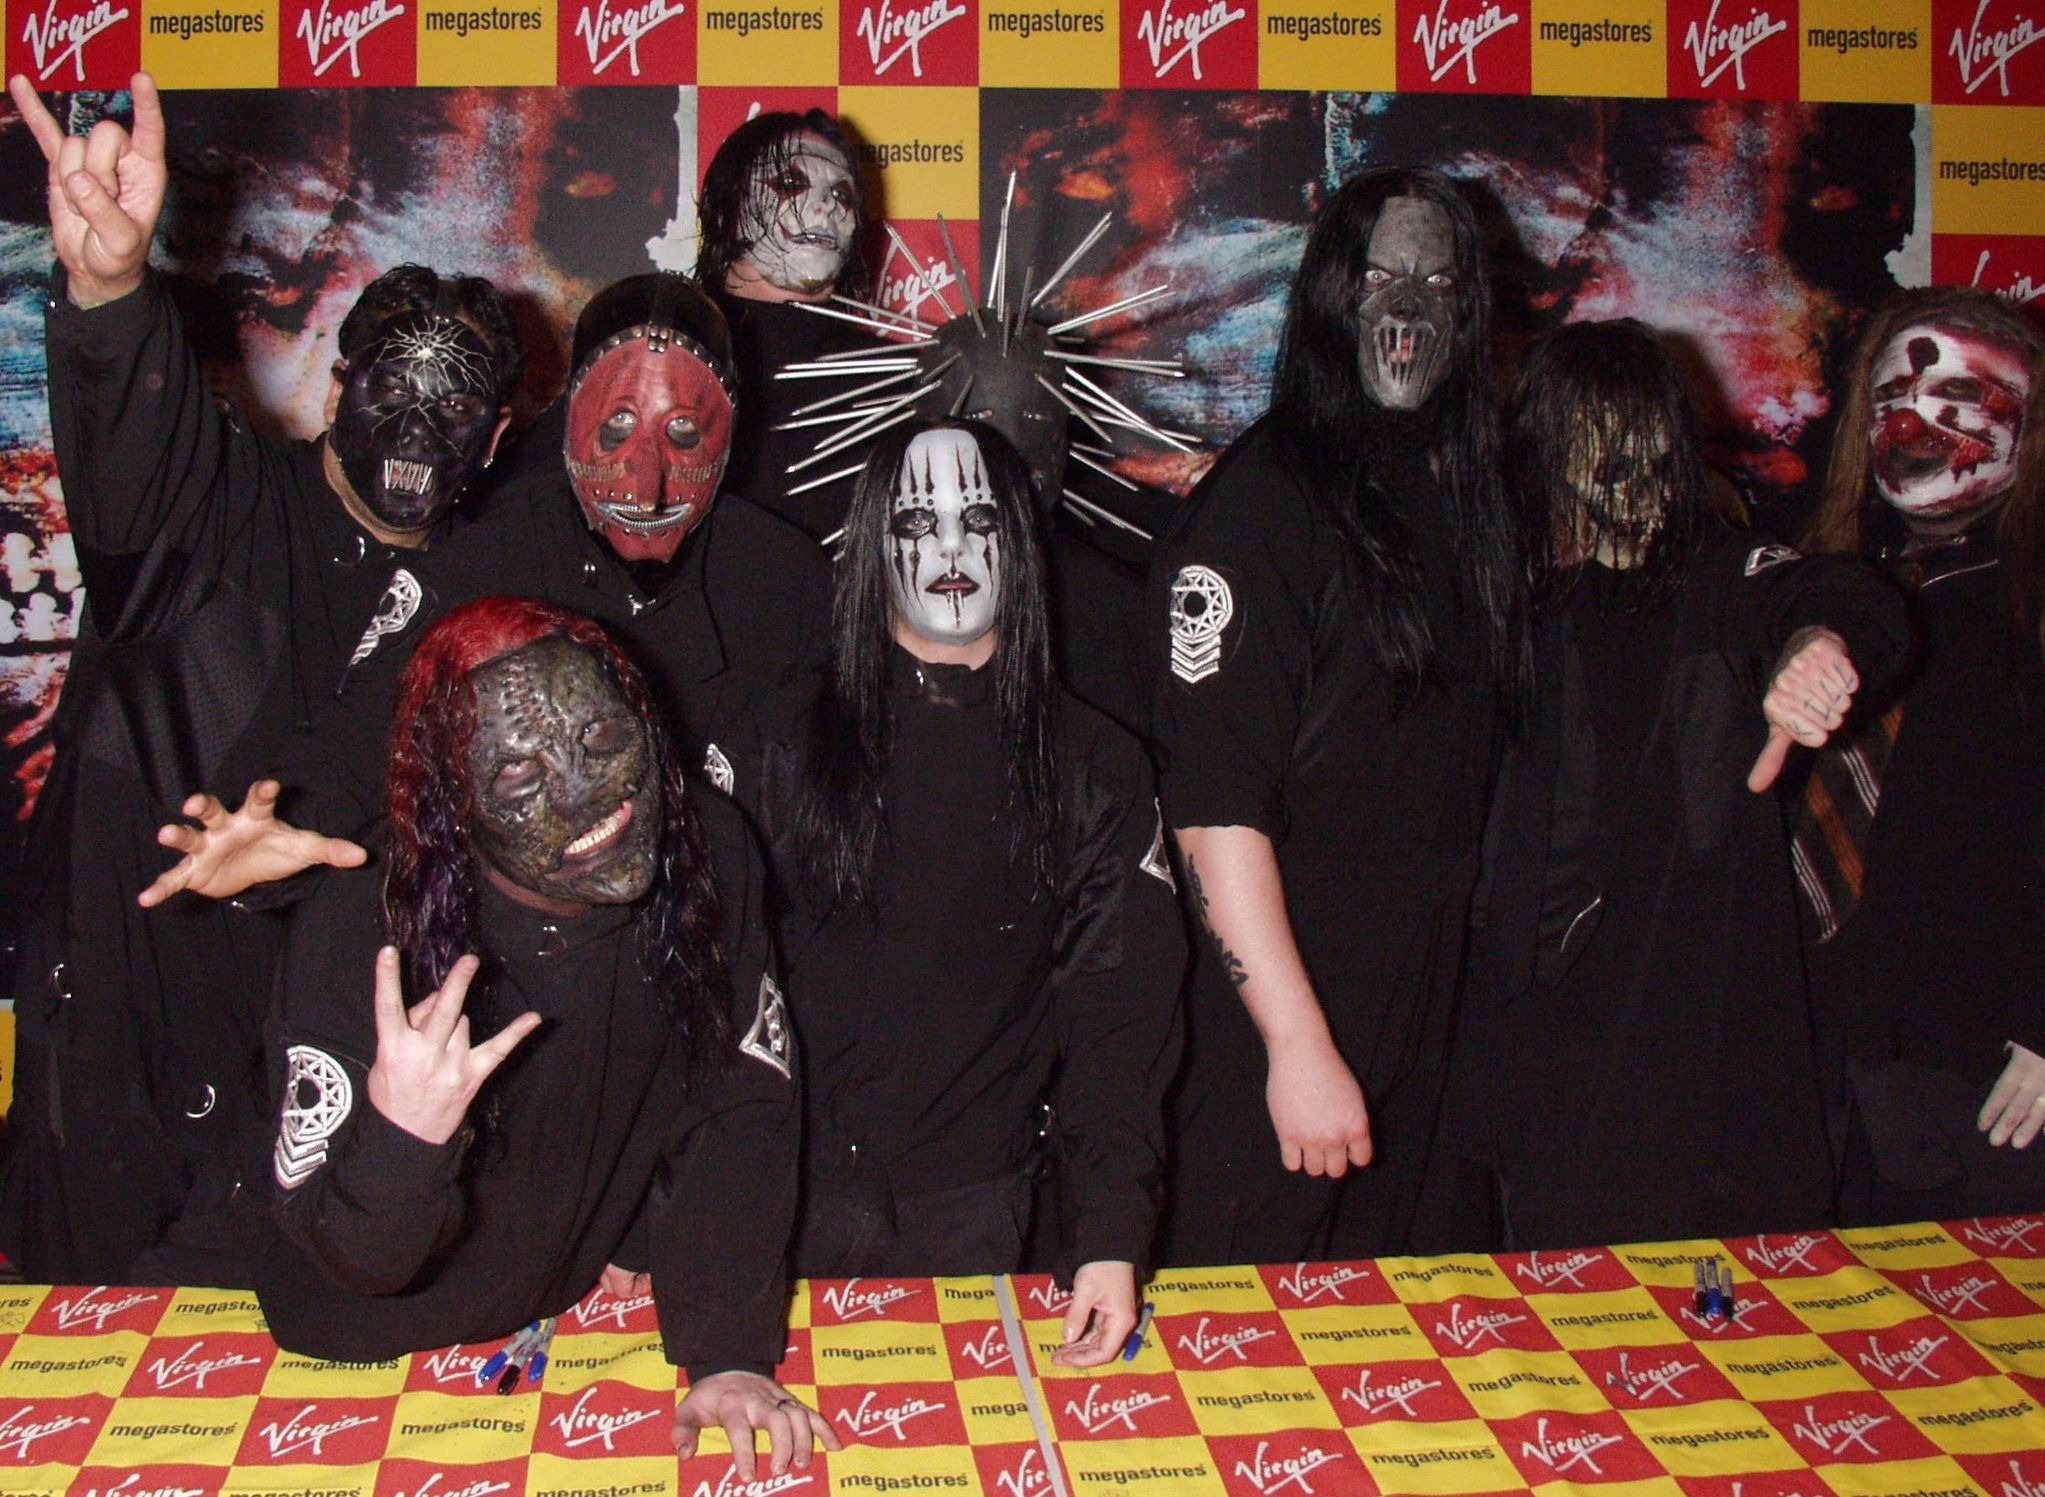 Rock band Slipknot is heading to the UK this year